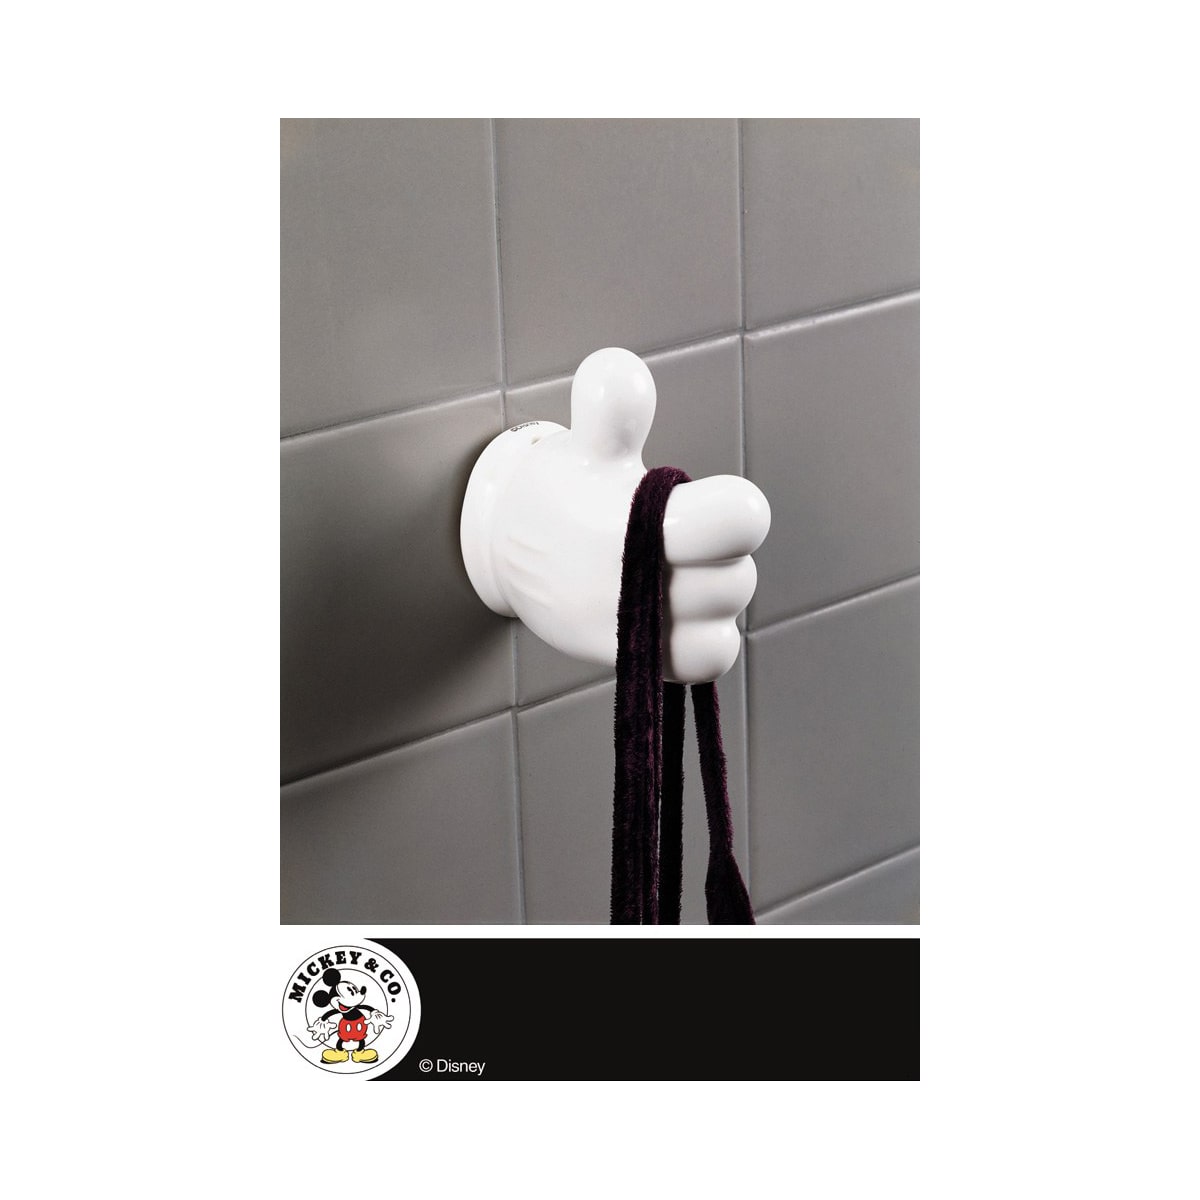 Kohler undefined White Accessory Robe Hook from the Disney series 